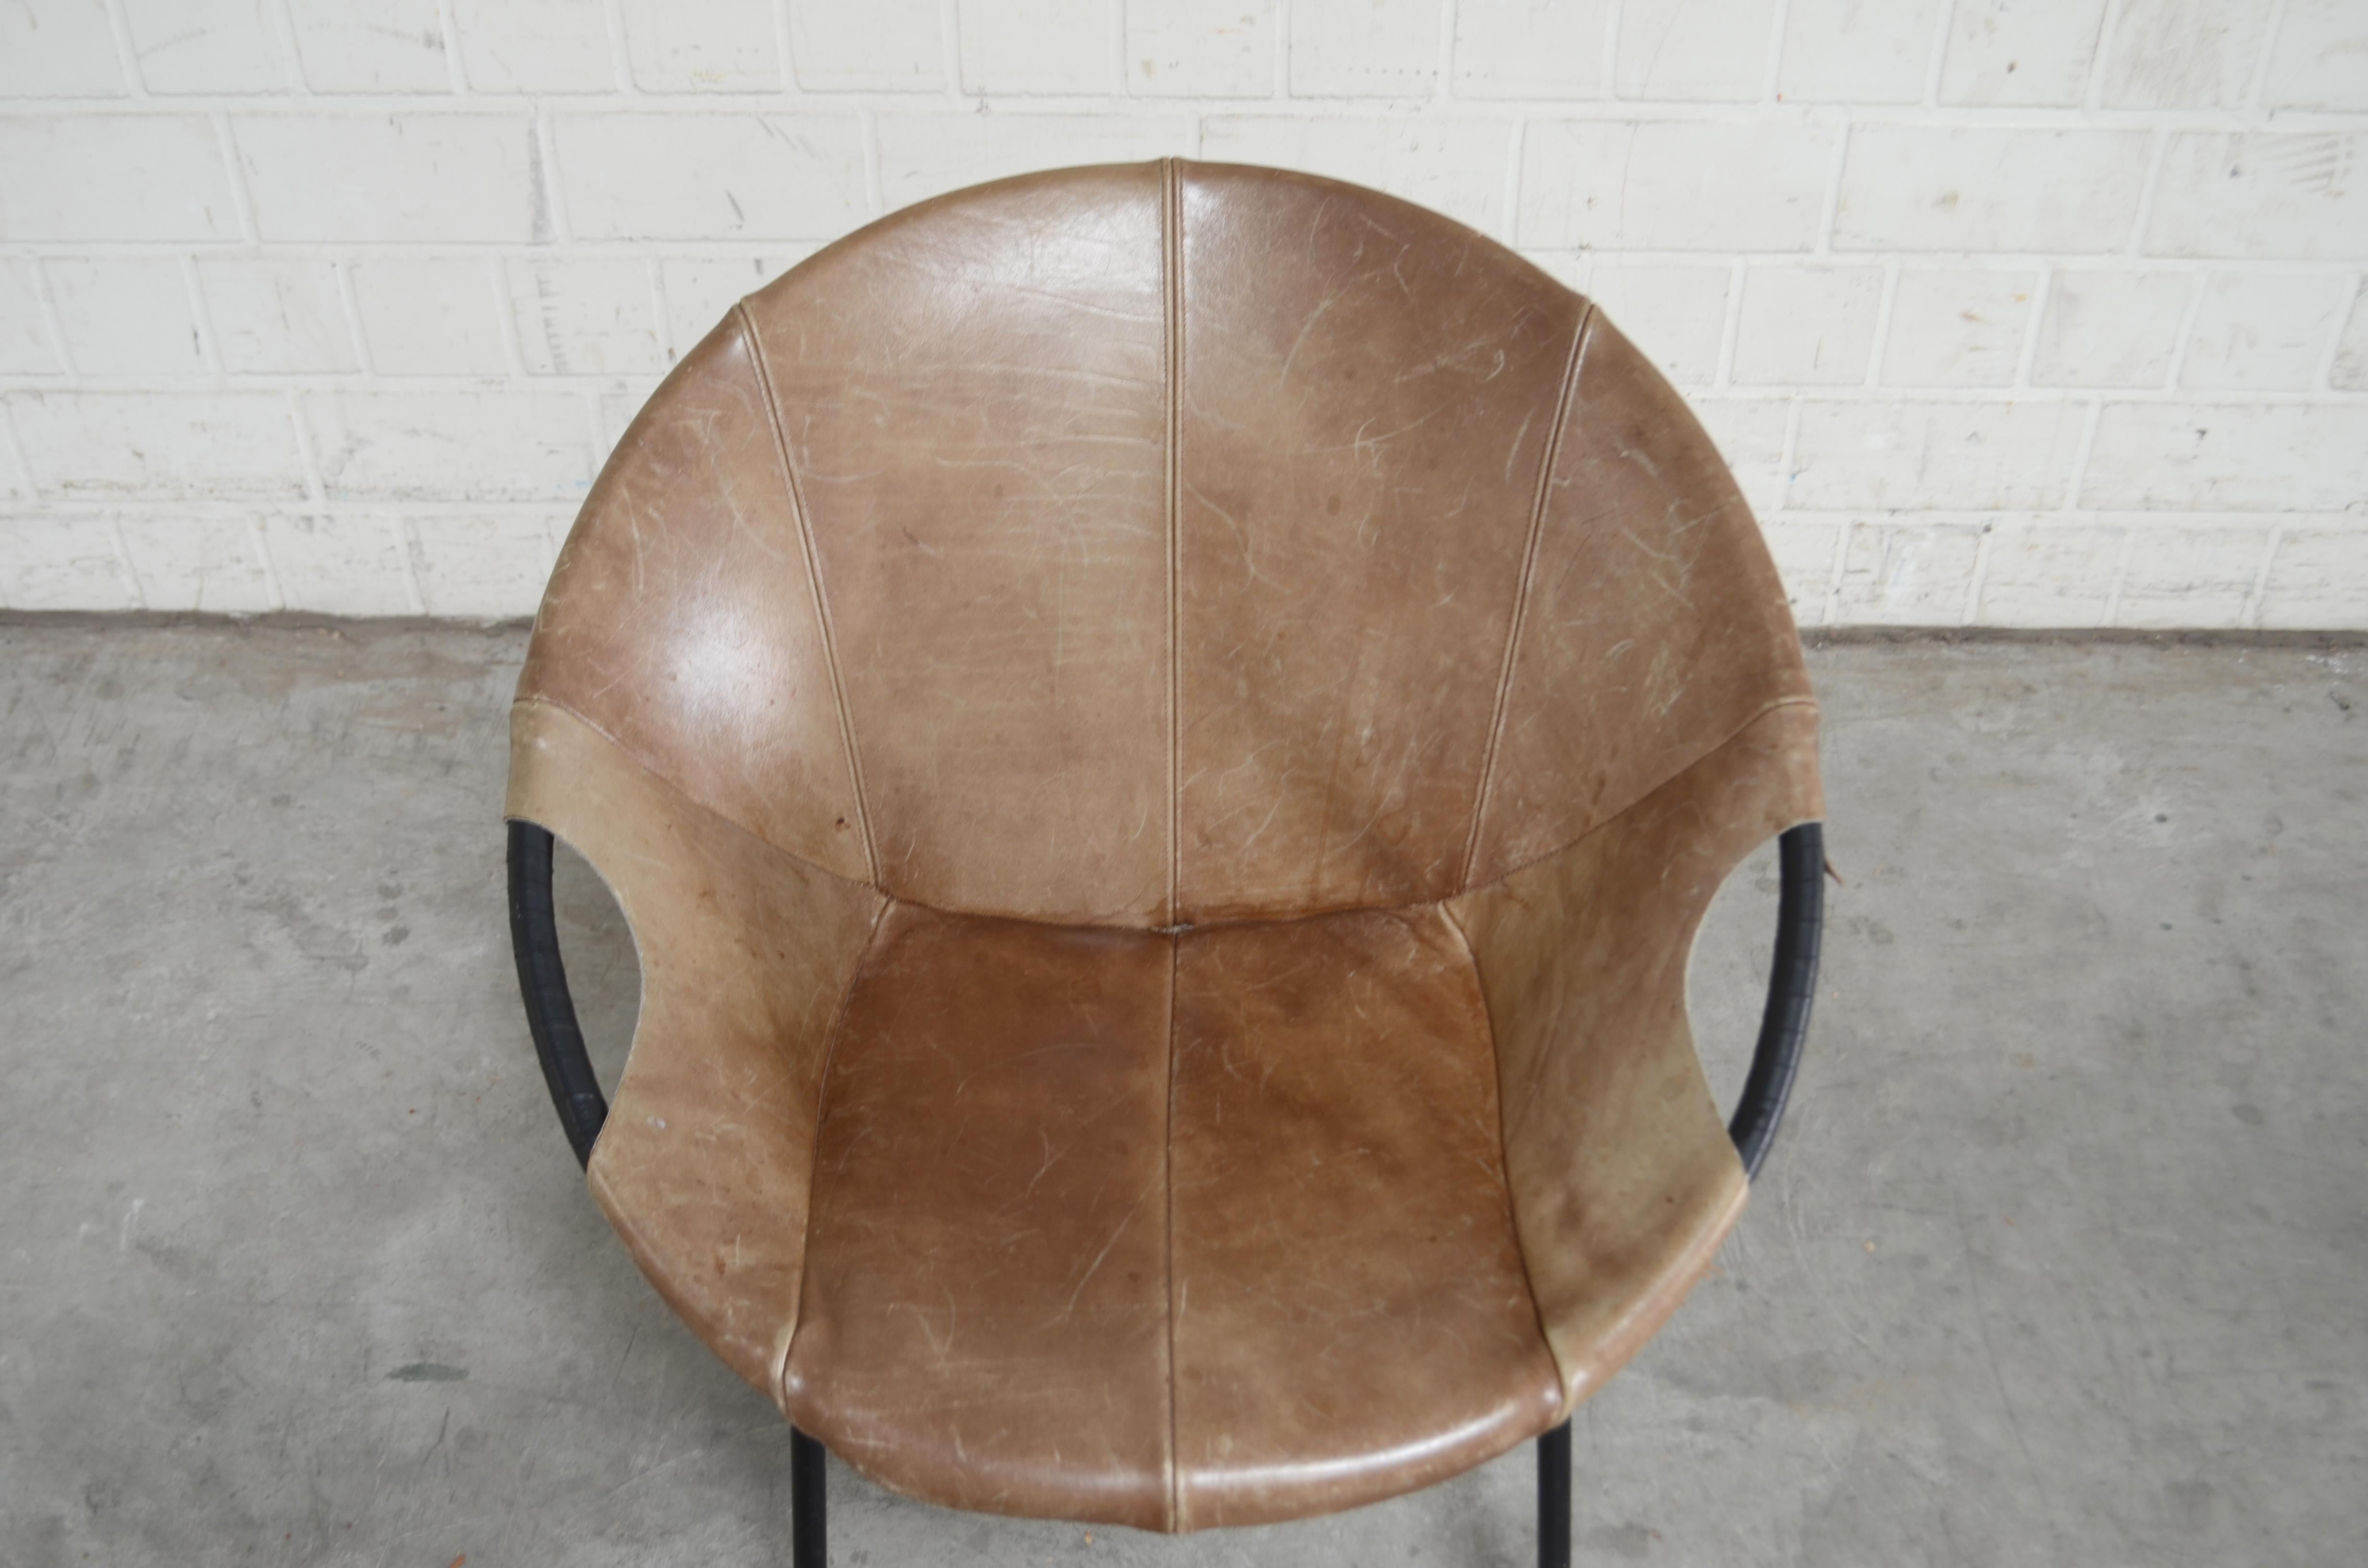 Metal Lusch + Co Balloon Cocktail Leather brown Chair